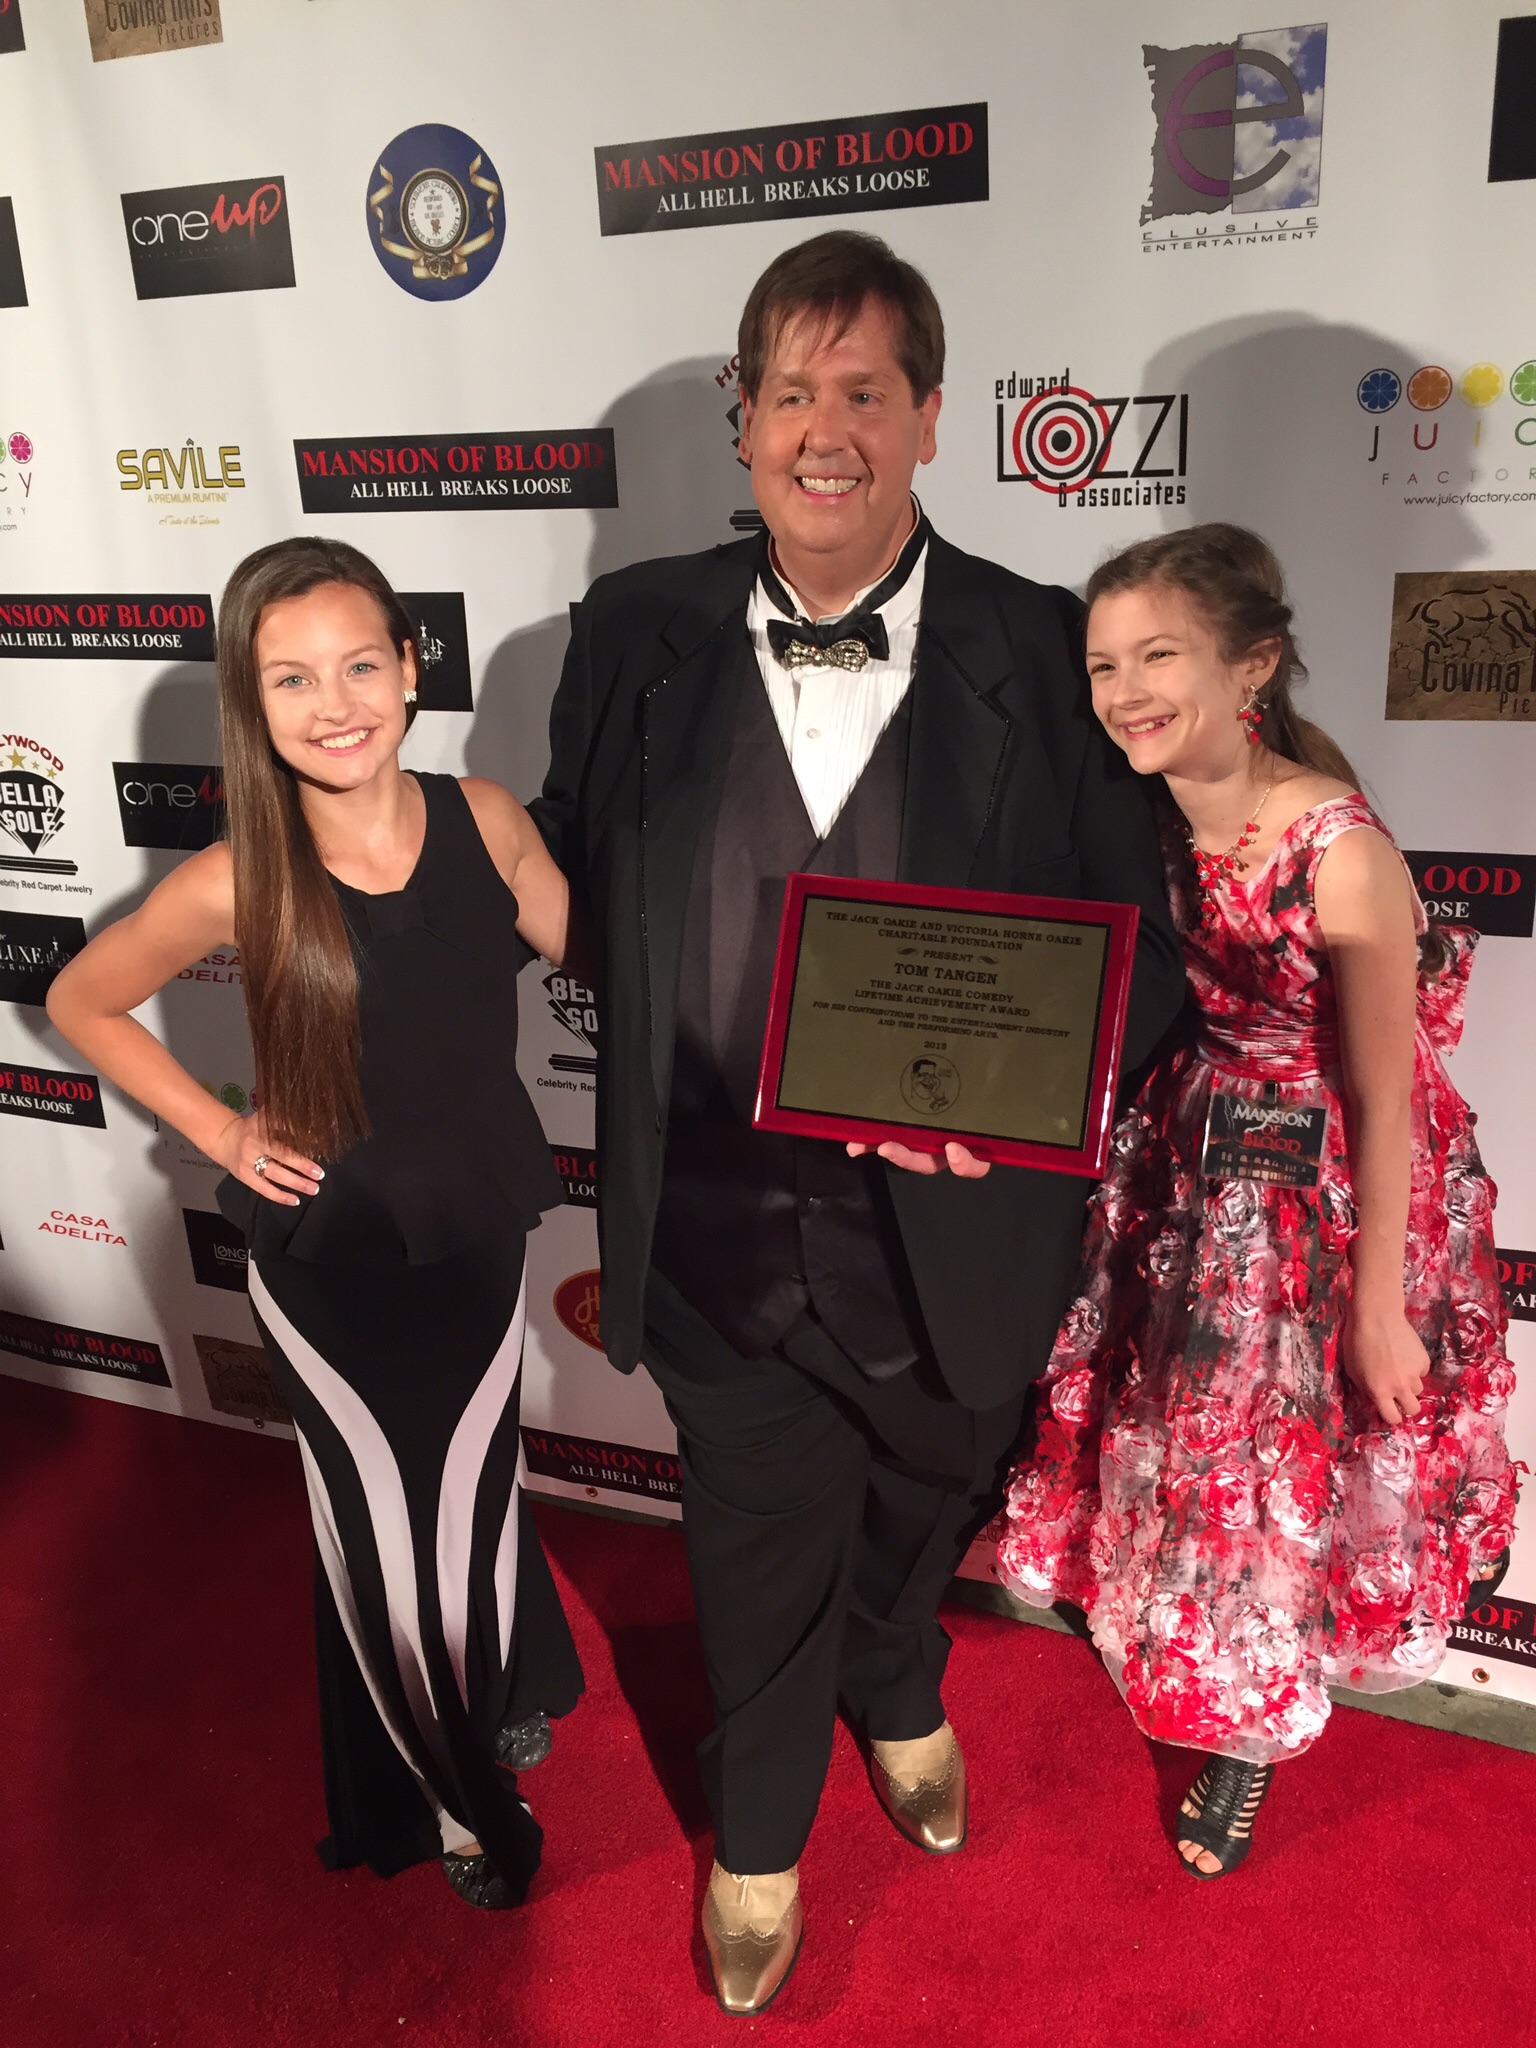 On the red carpet with Tom Tangen, Amber Patino and Madison Mae.